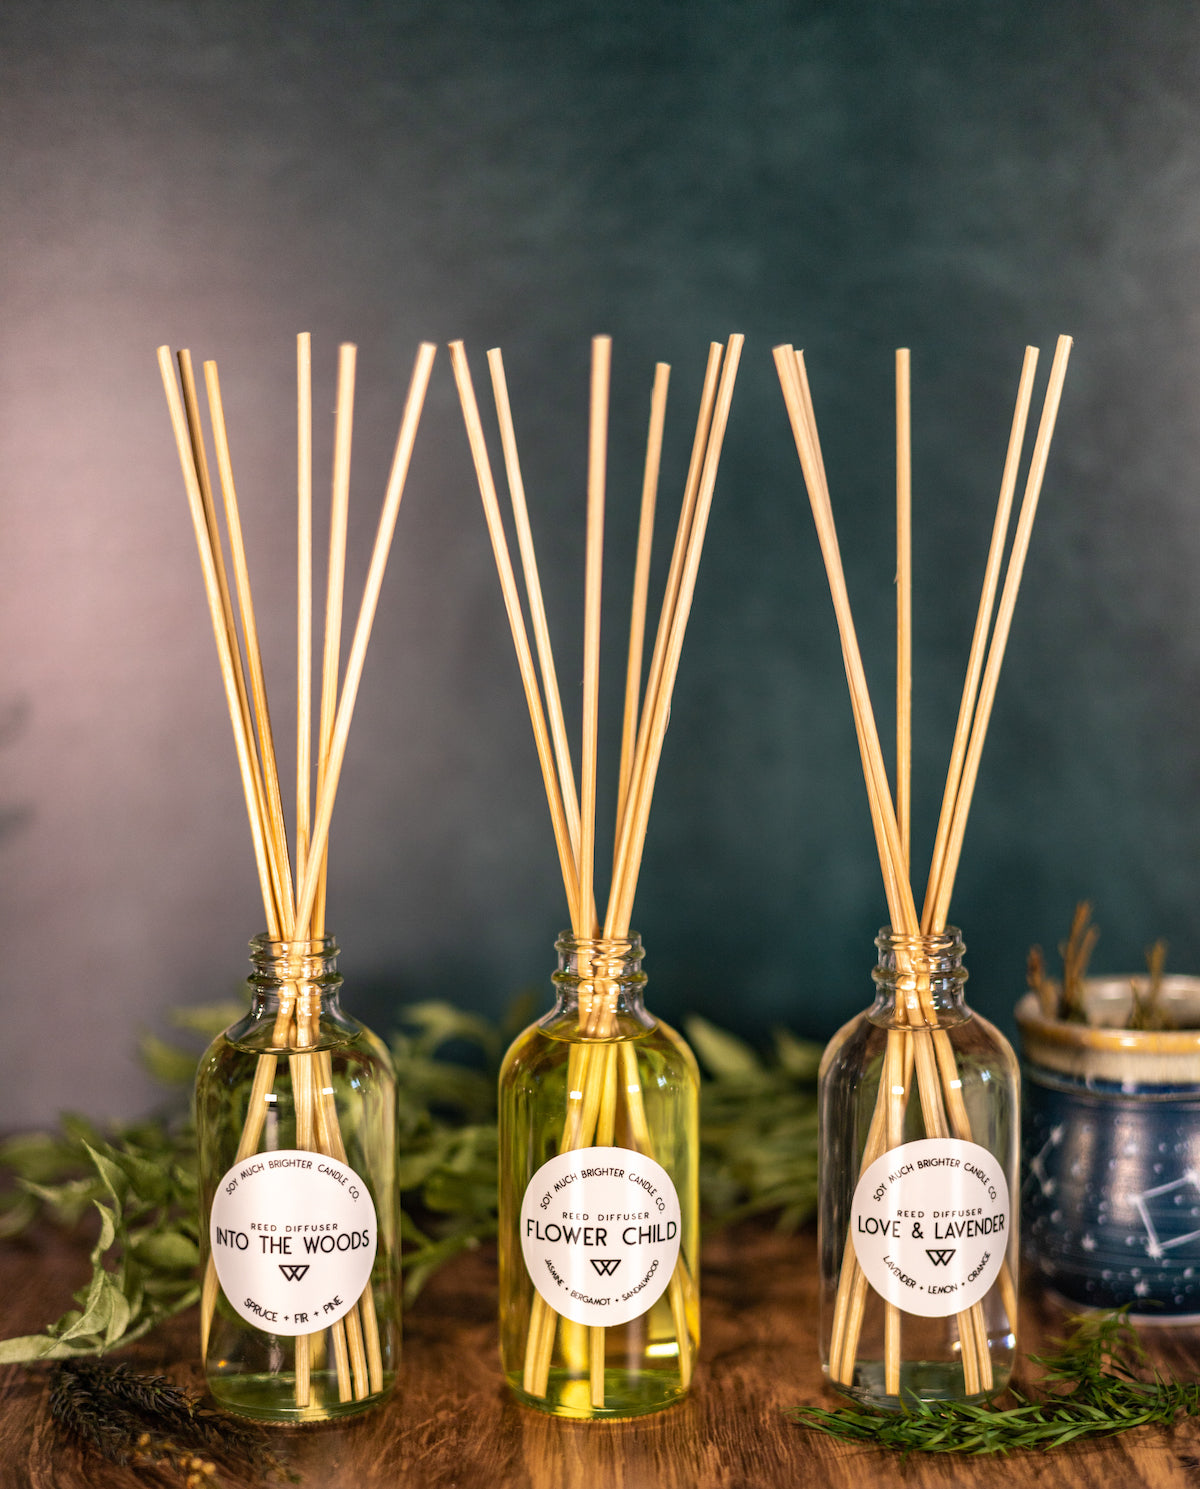 Reed diffusers by Soy Much Brighter in Beverly, Ma